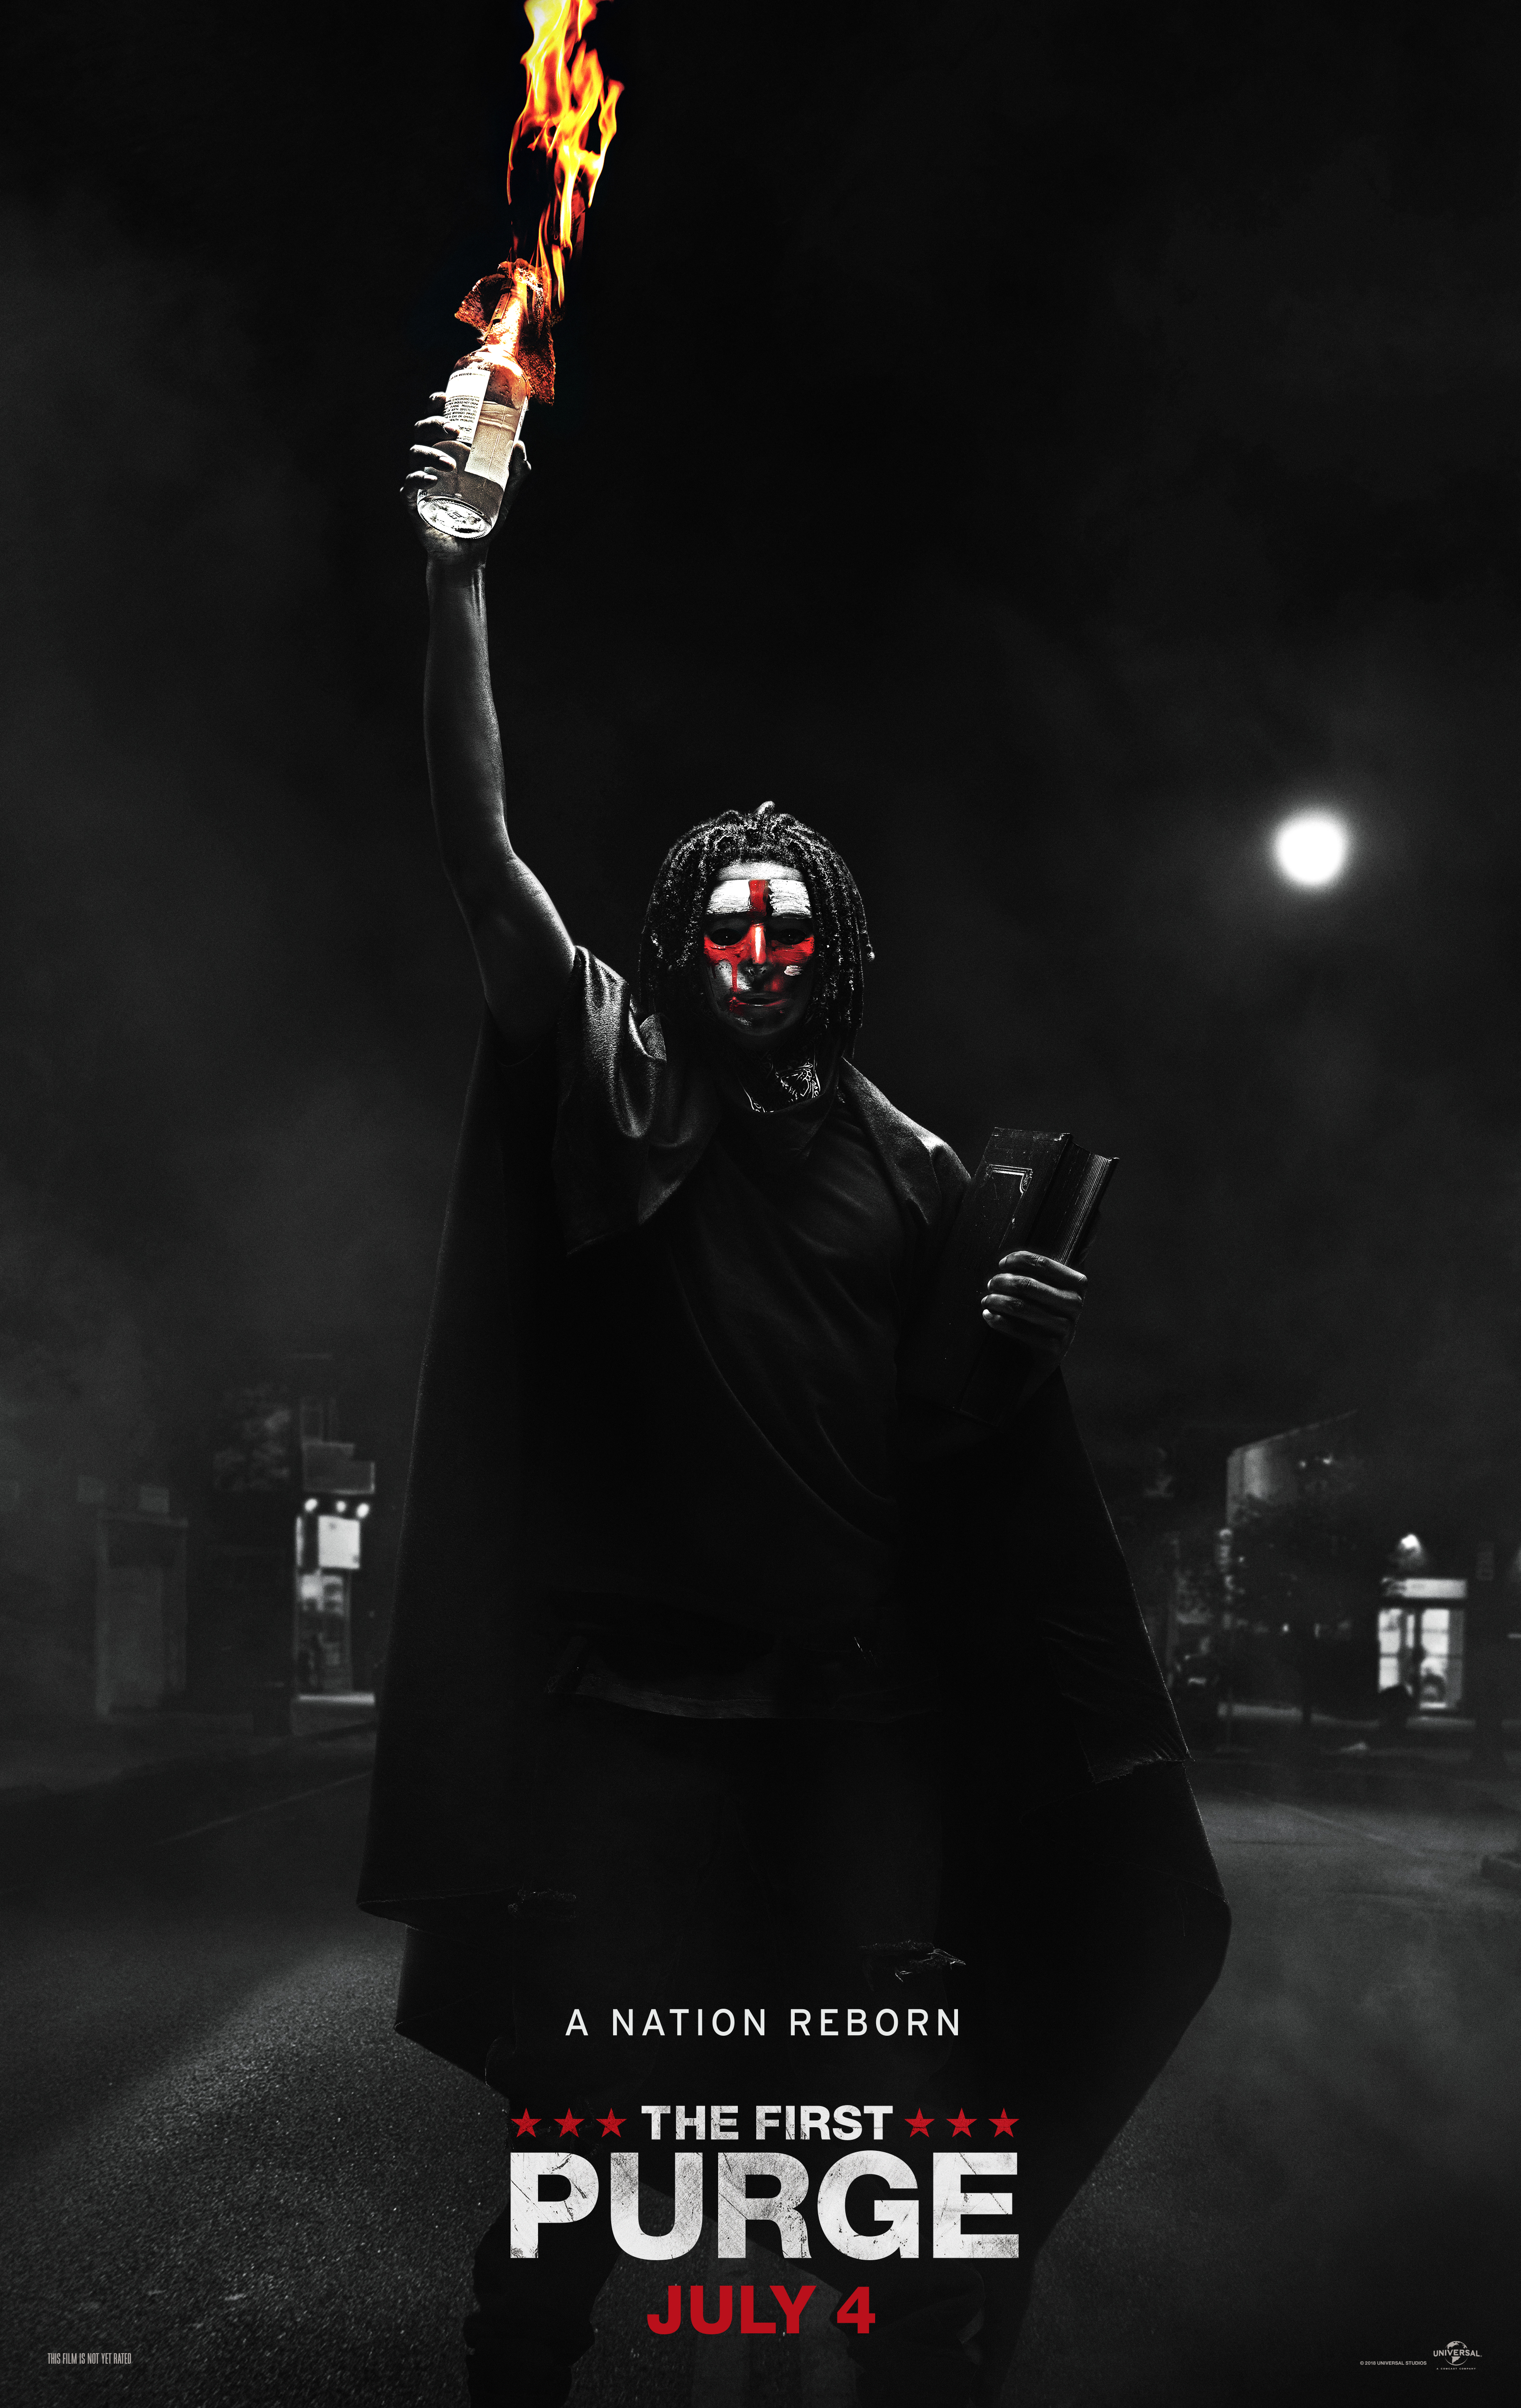 New The First Purge Featurette And Clip Released | Nothing But Geek